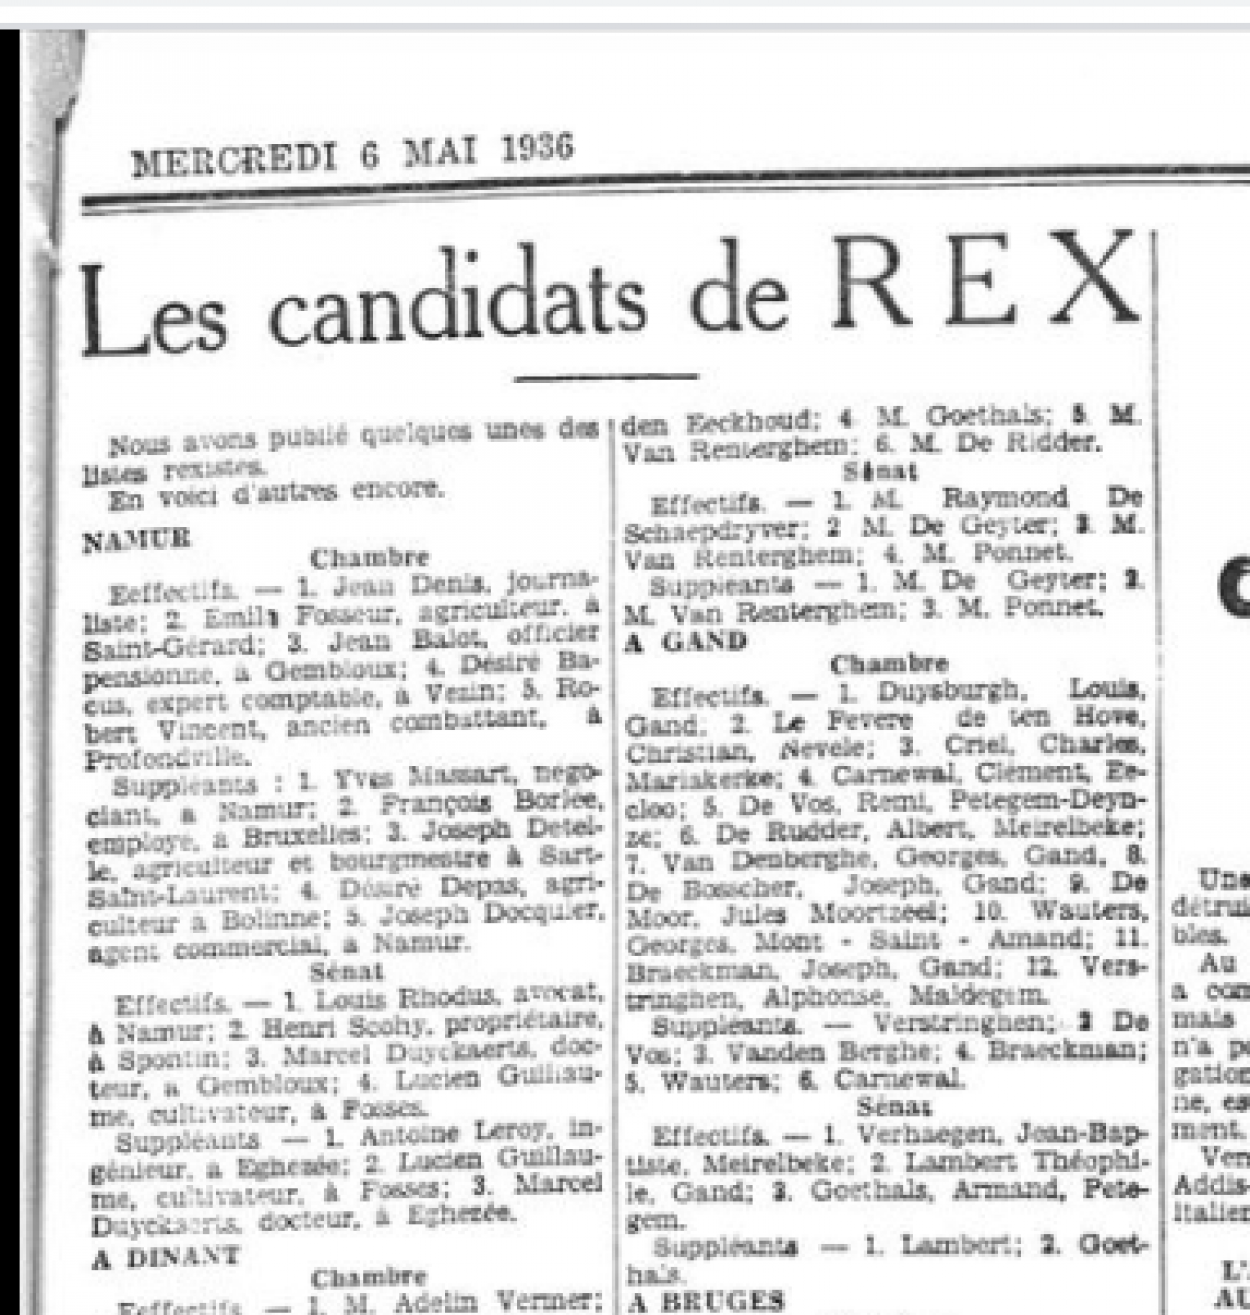 pays-rAel-6-5-1936-p-3-candidats-rexistes-dAtail.png